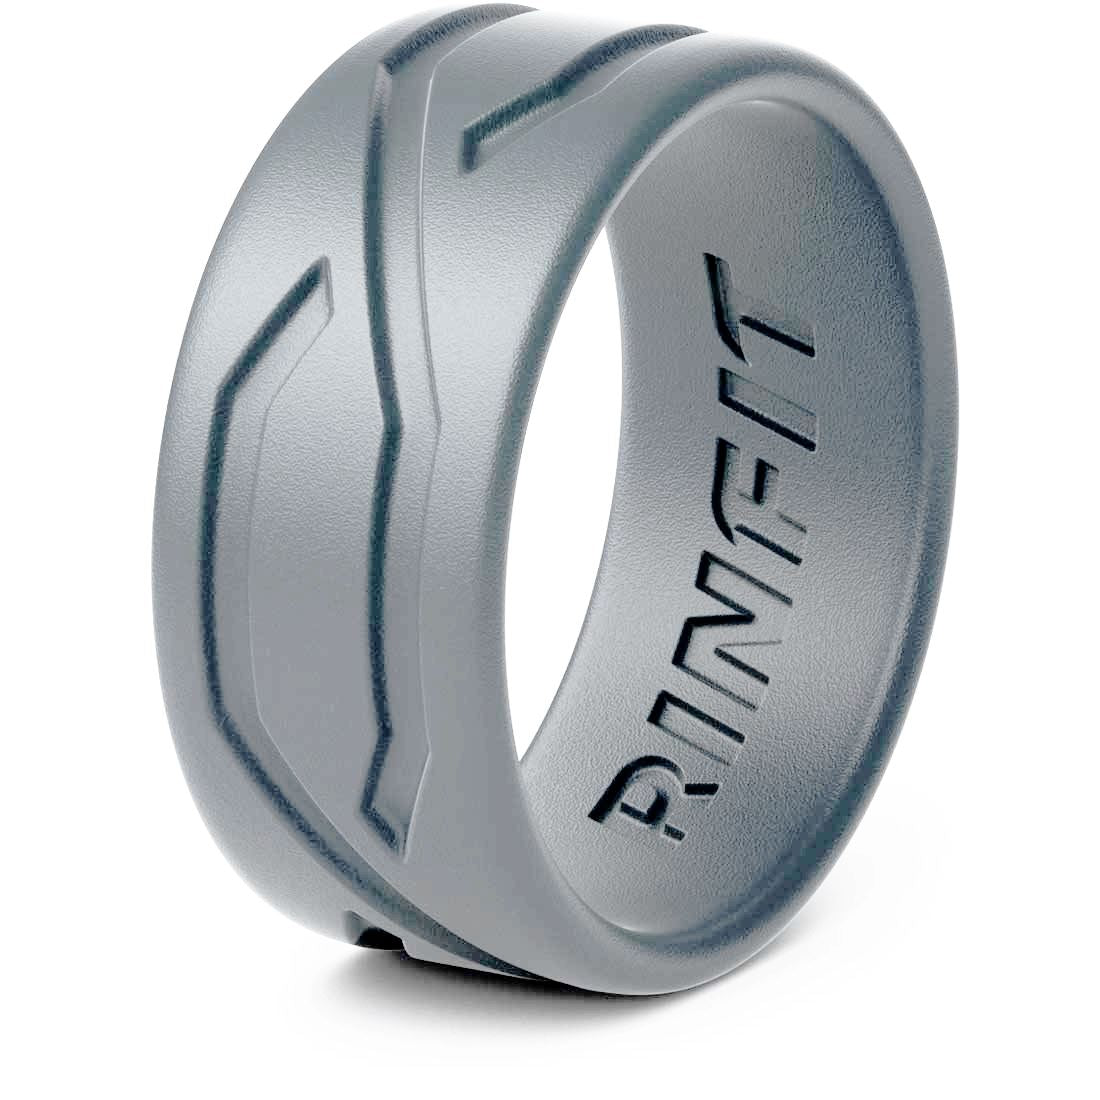 NEW ARRIVALS – Rinfit - Silicone Wedding Rings